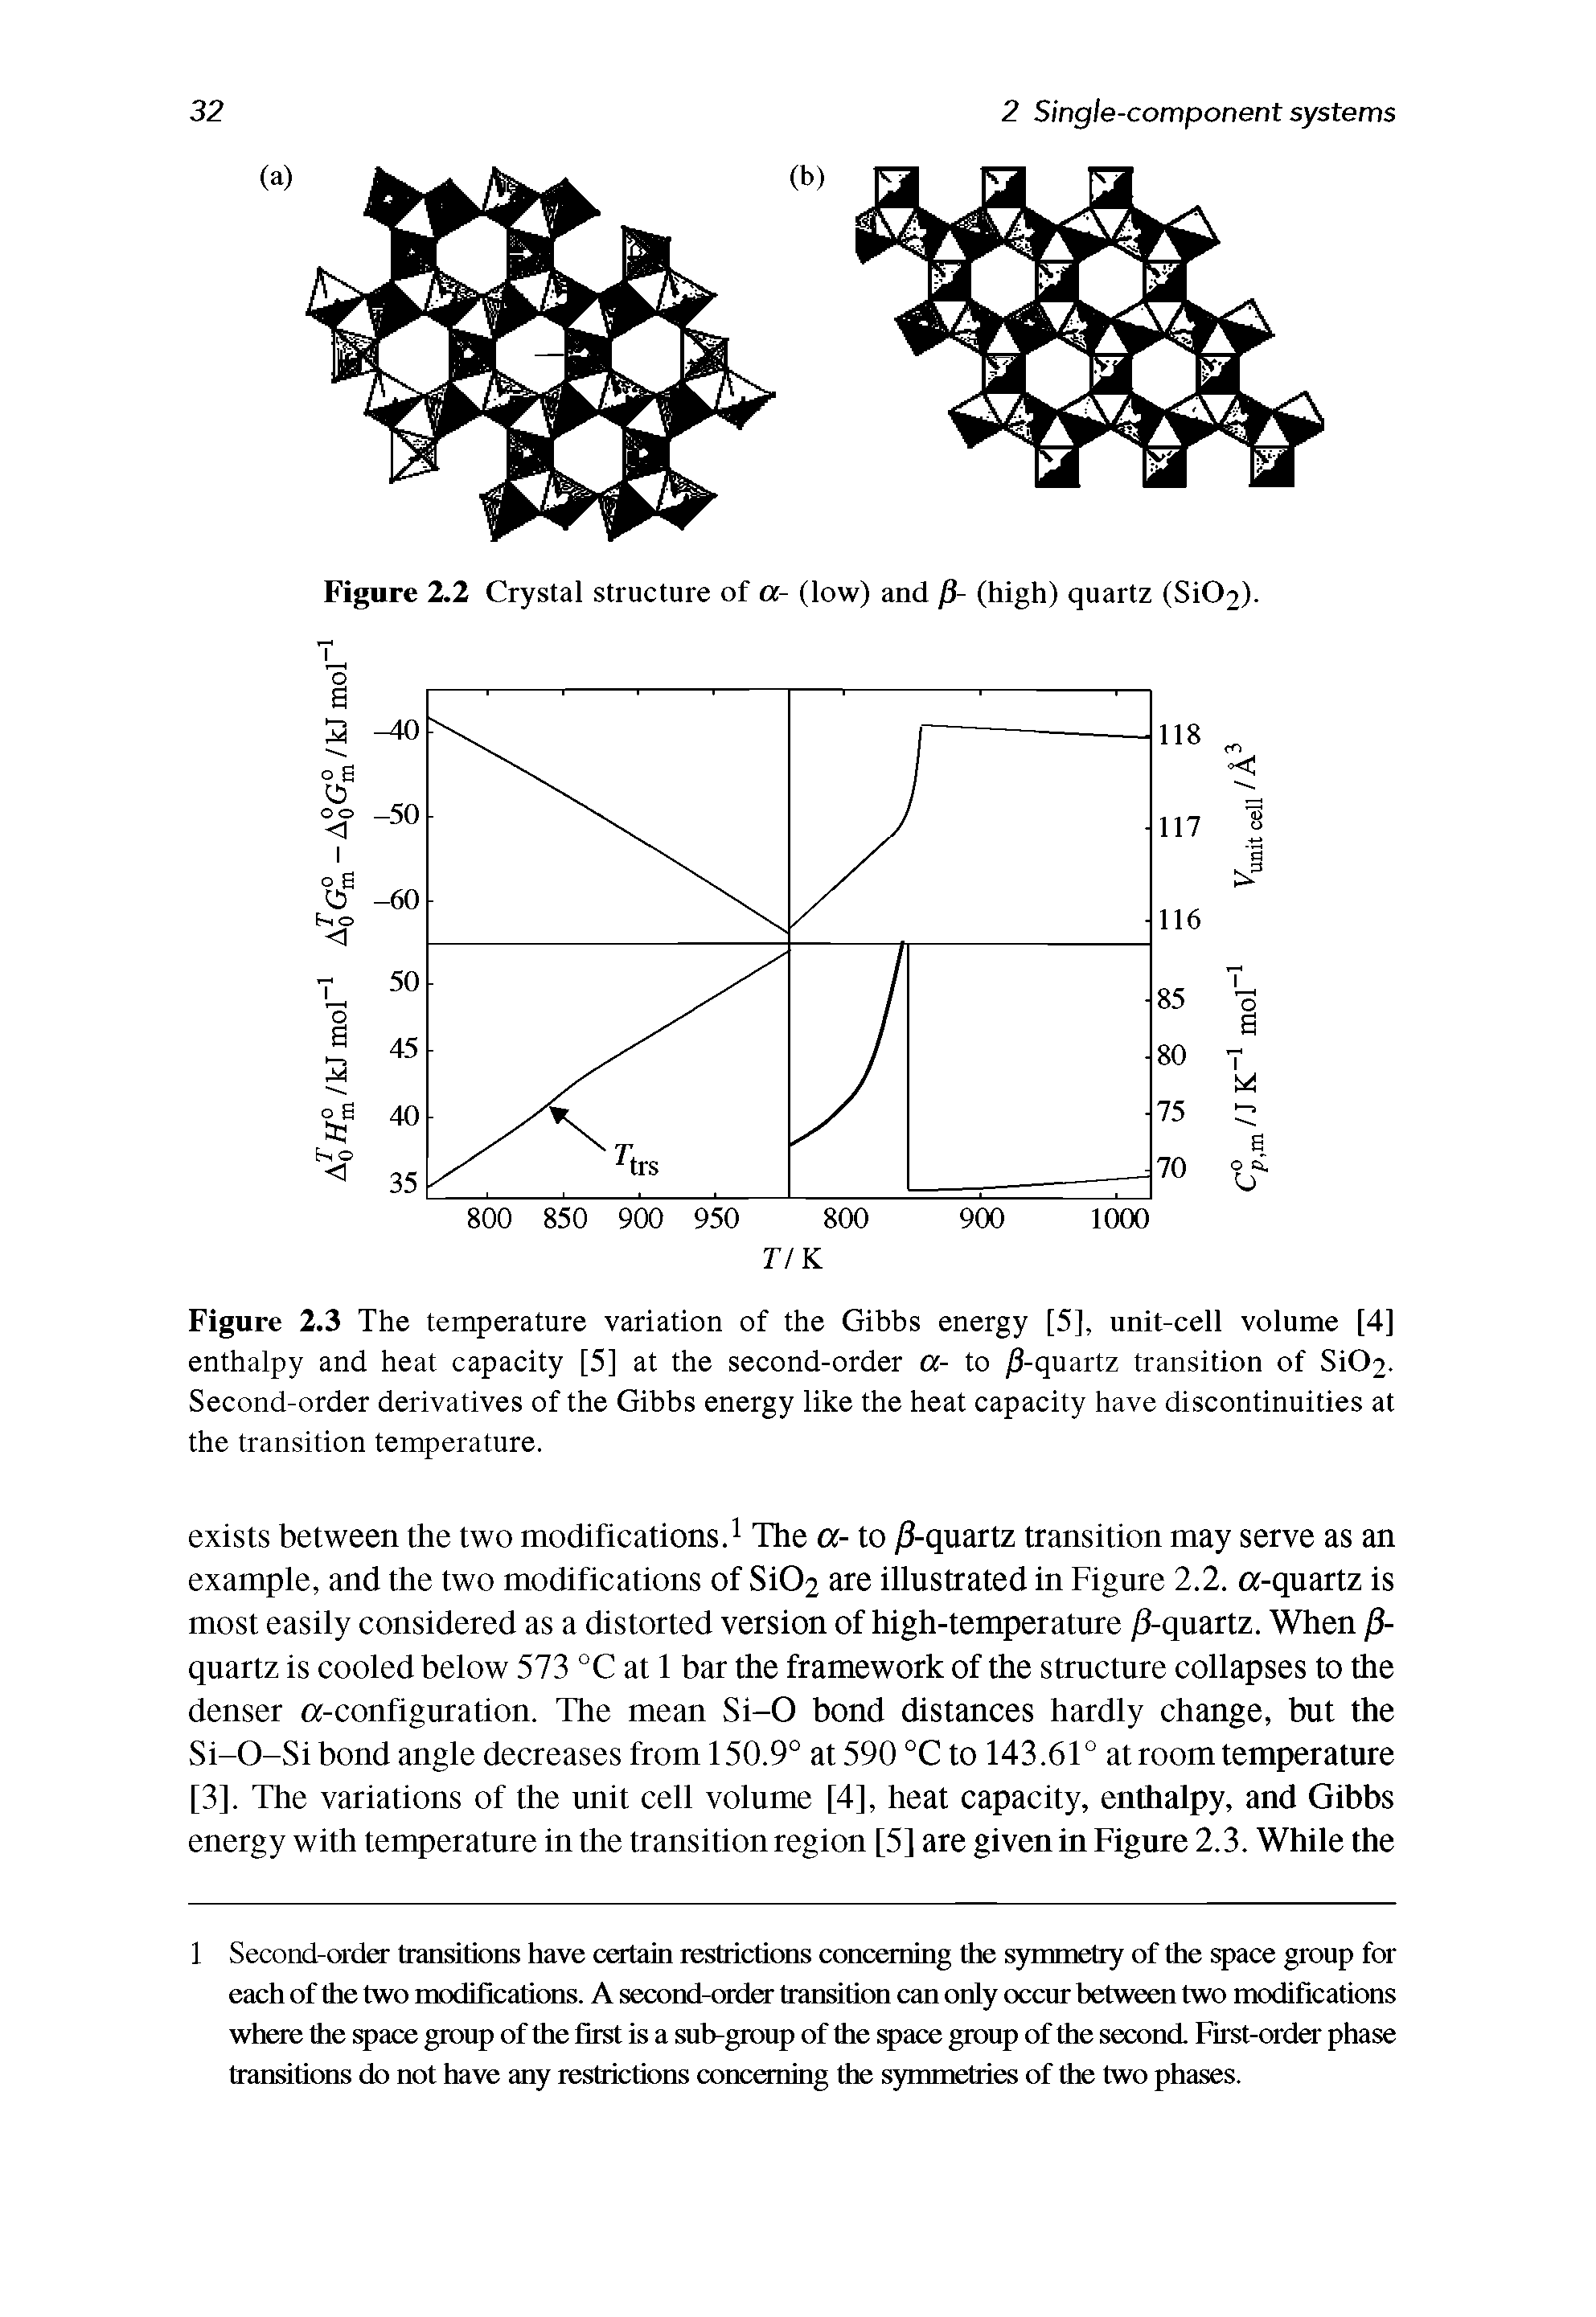 Figure 2.3 The temperature variation of the Gibbs energy [5], unit-cell volume [4] enthalpy and heat capacity [5] at the second-order a- to /3-quartz transition of SiC>2-Second-order derivatives of the Gibbs energy like the heat capacity have discontinuities at the transition temperature.